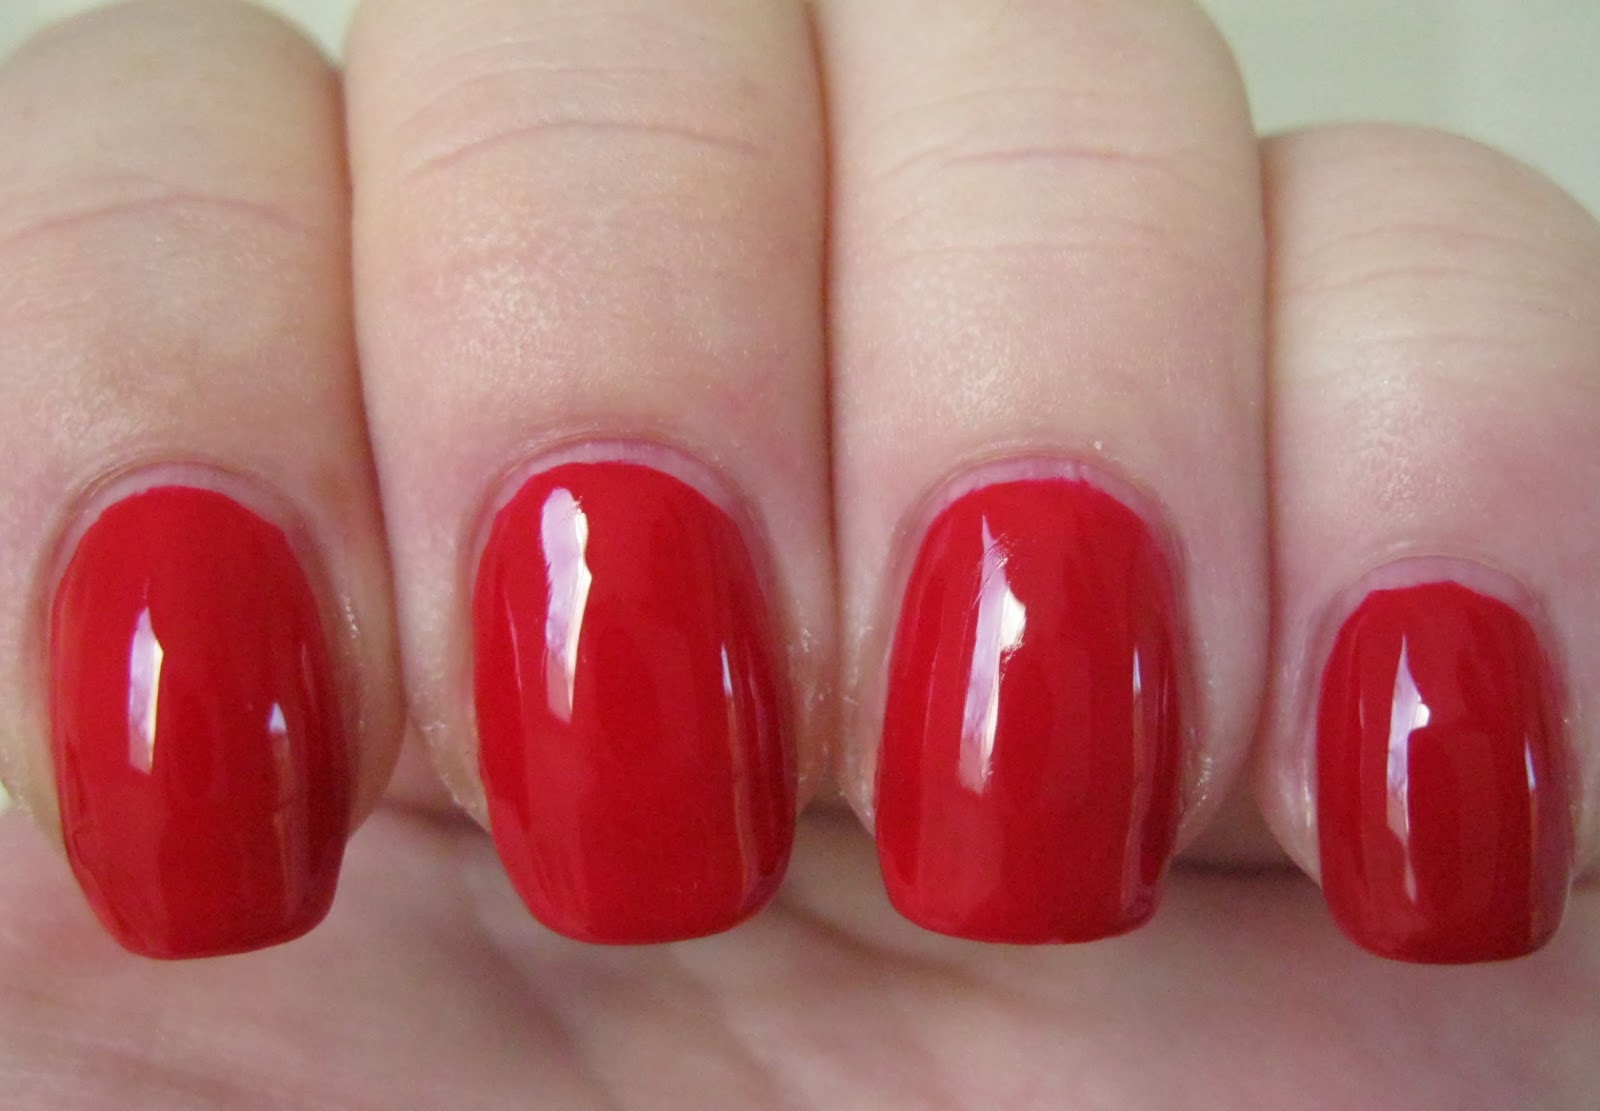 5. "Butter London Come to Bed Red" - wide 3